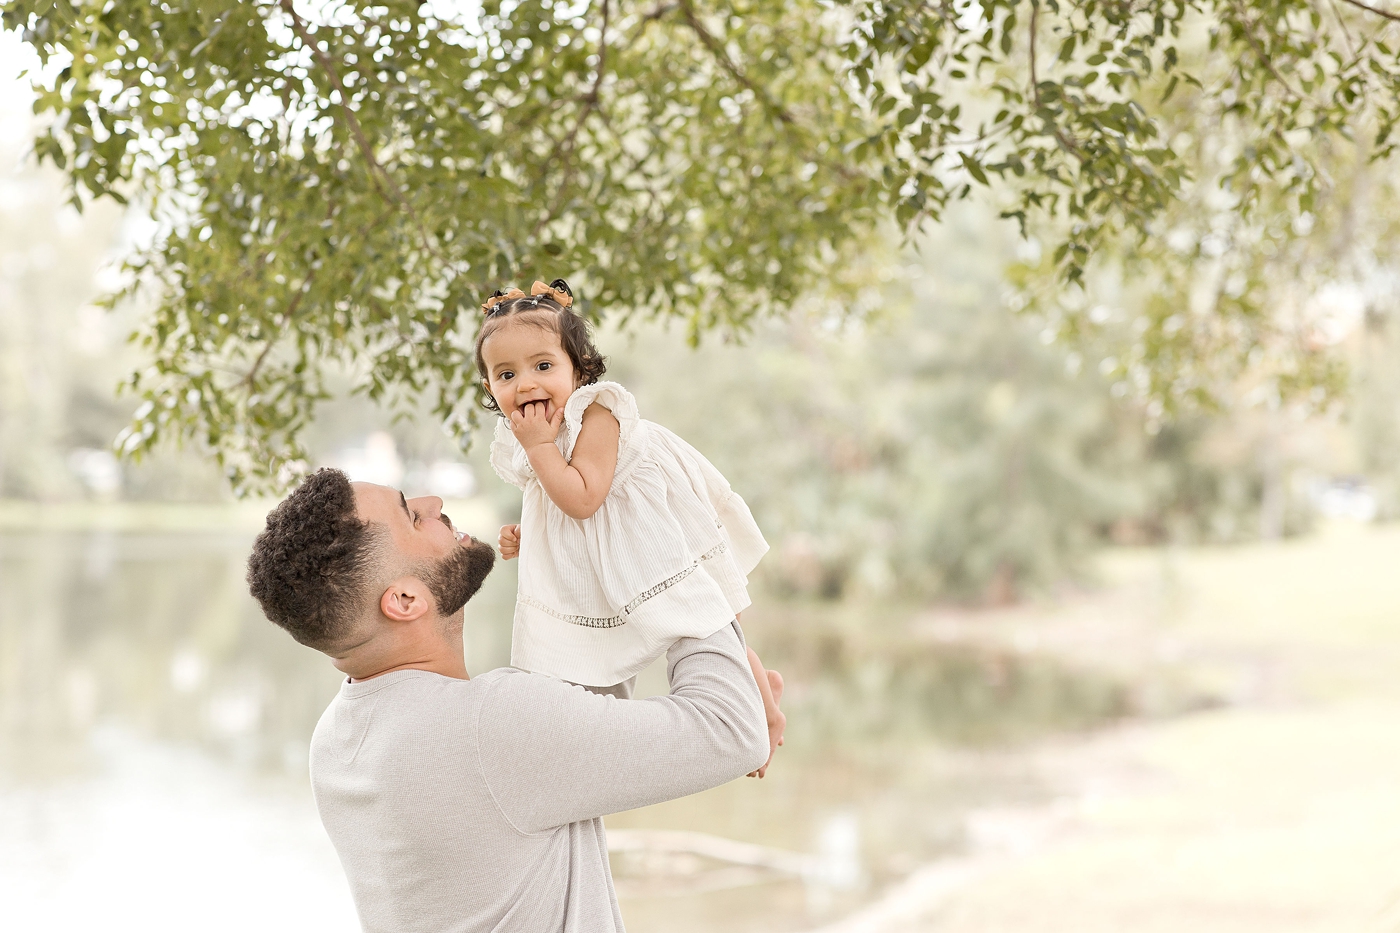 Dad holds up baby girl by the water during baby photography miami session. Photo by Ivanna Vidal Photography.